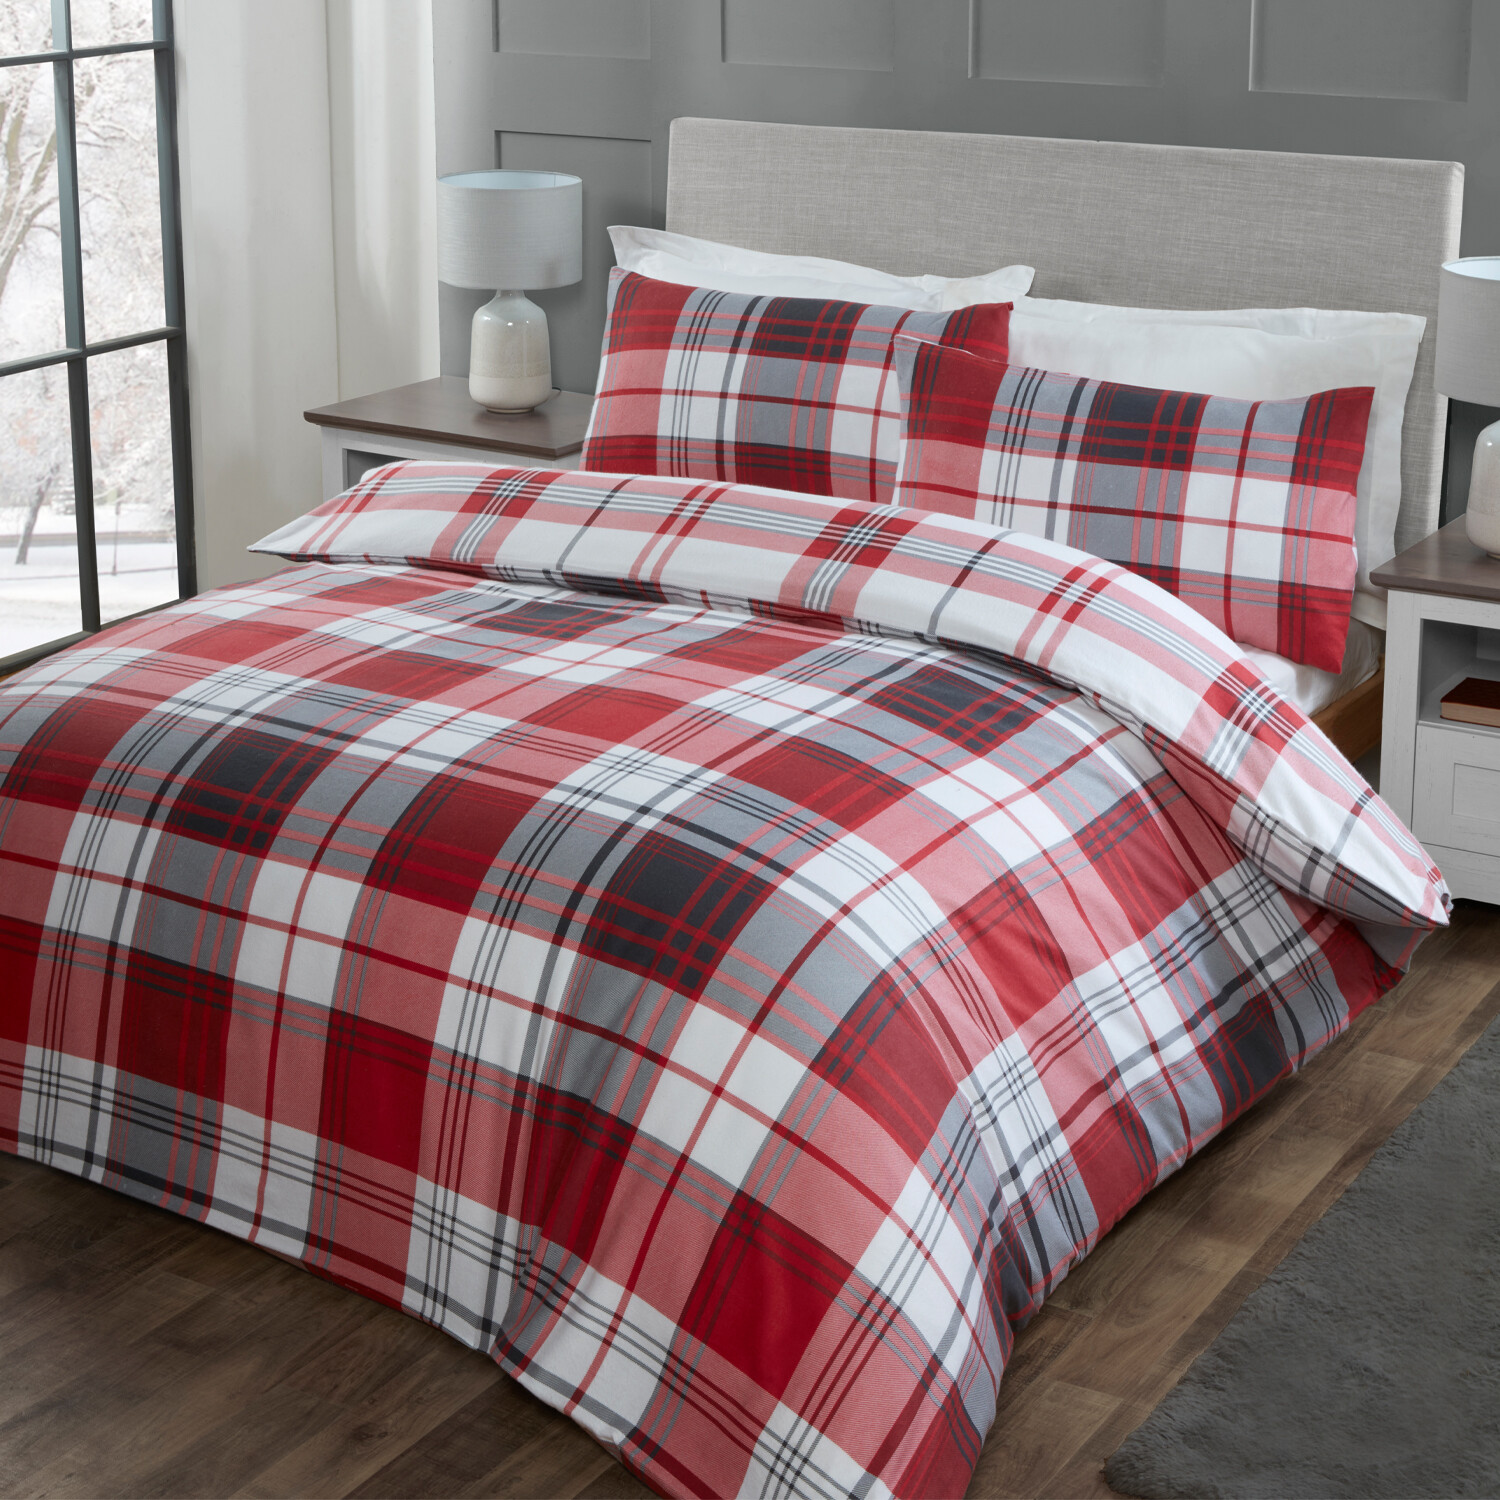 Hamilton Grey Check Duvet Cover and Pillowcase Set - Red / Super King size Image 2